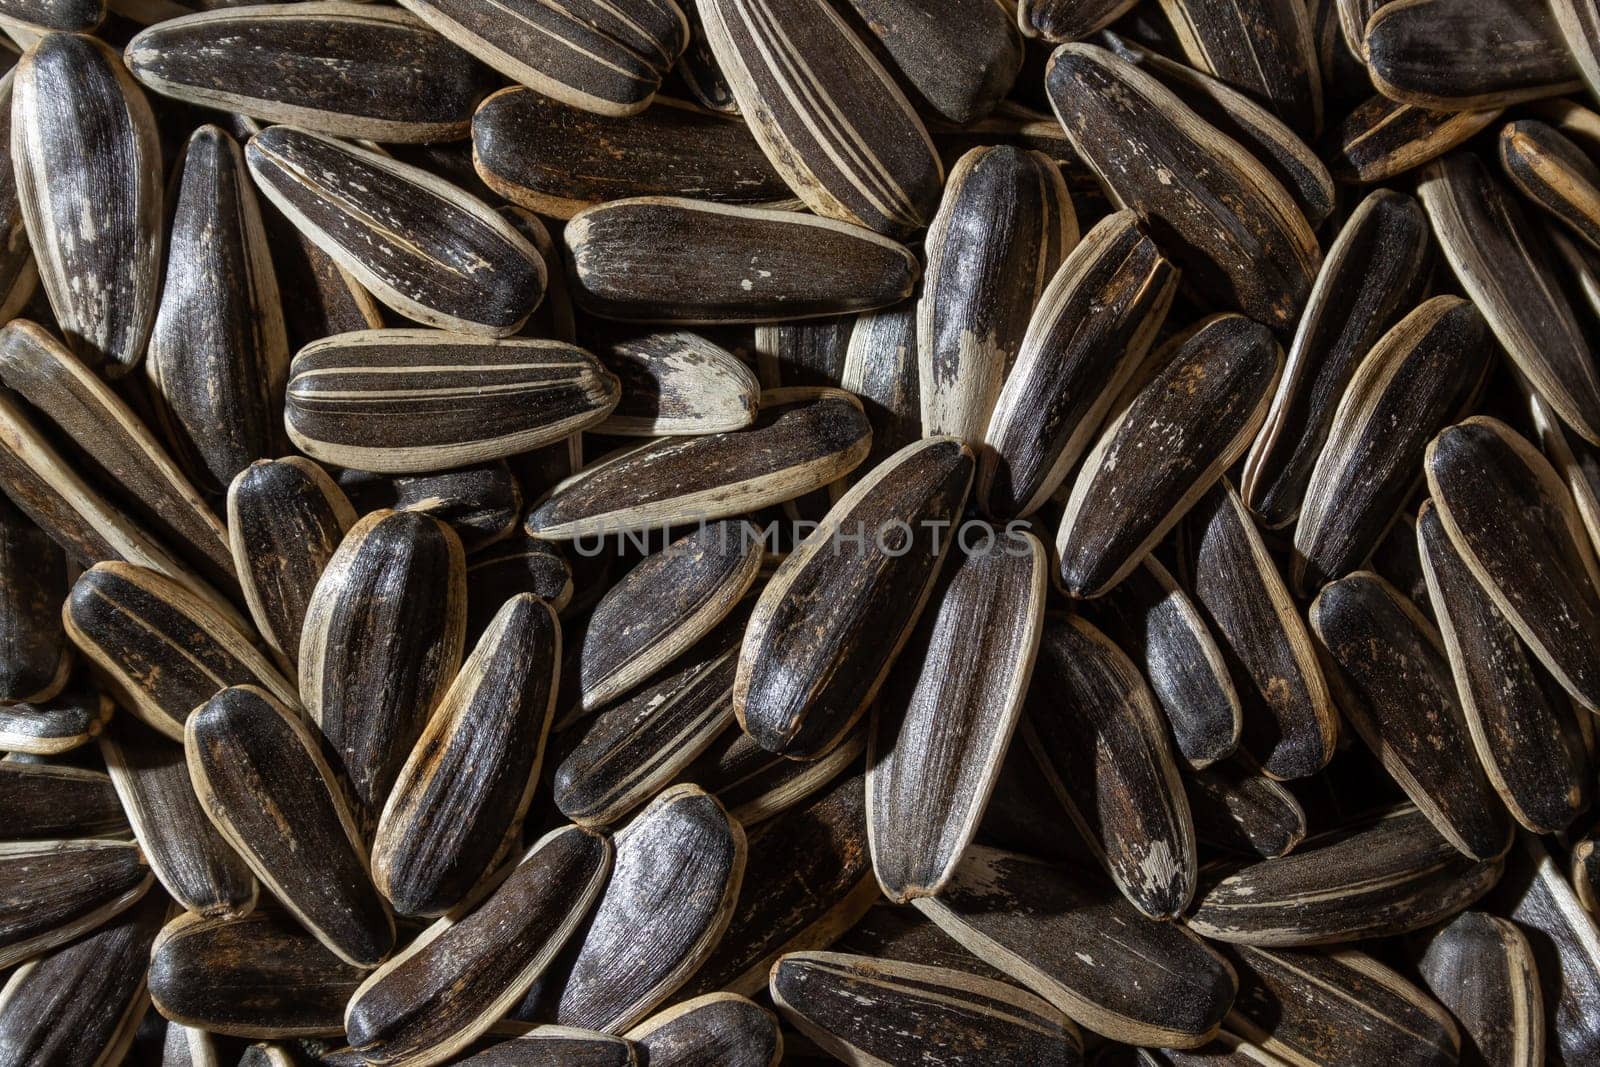 Non Salty Roasted Sunflower Seeds in Shell: A Culinary Canvas of Sunflower Kernels, Creating a Lively and Textured Background for Gourmet Cooking. Scattered Sun Flower Seeds - Top View, Flat Lay